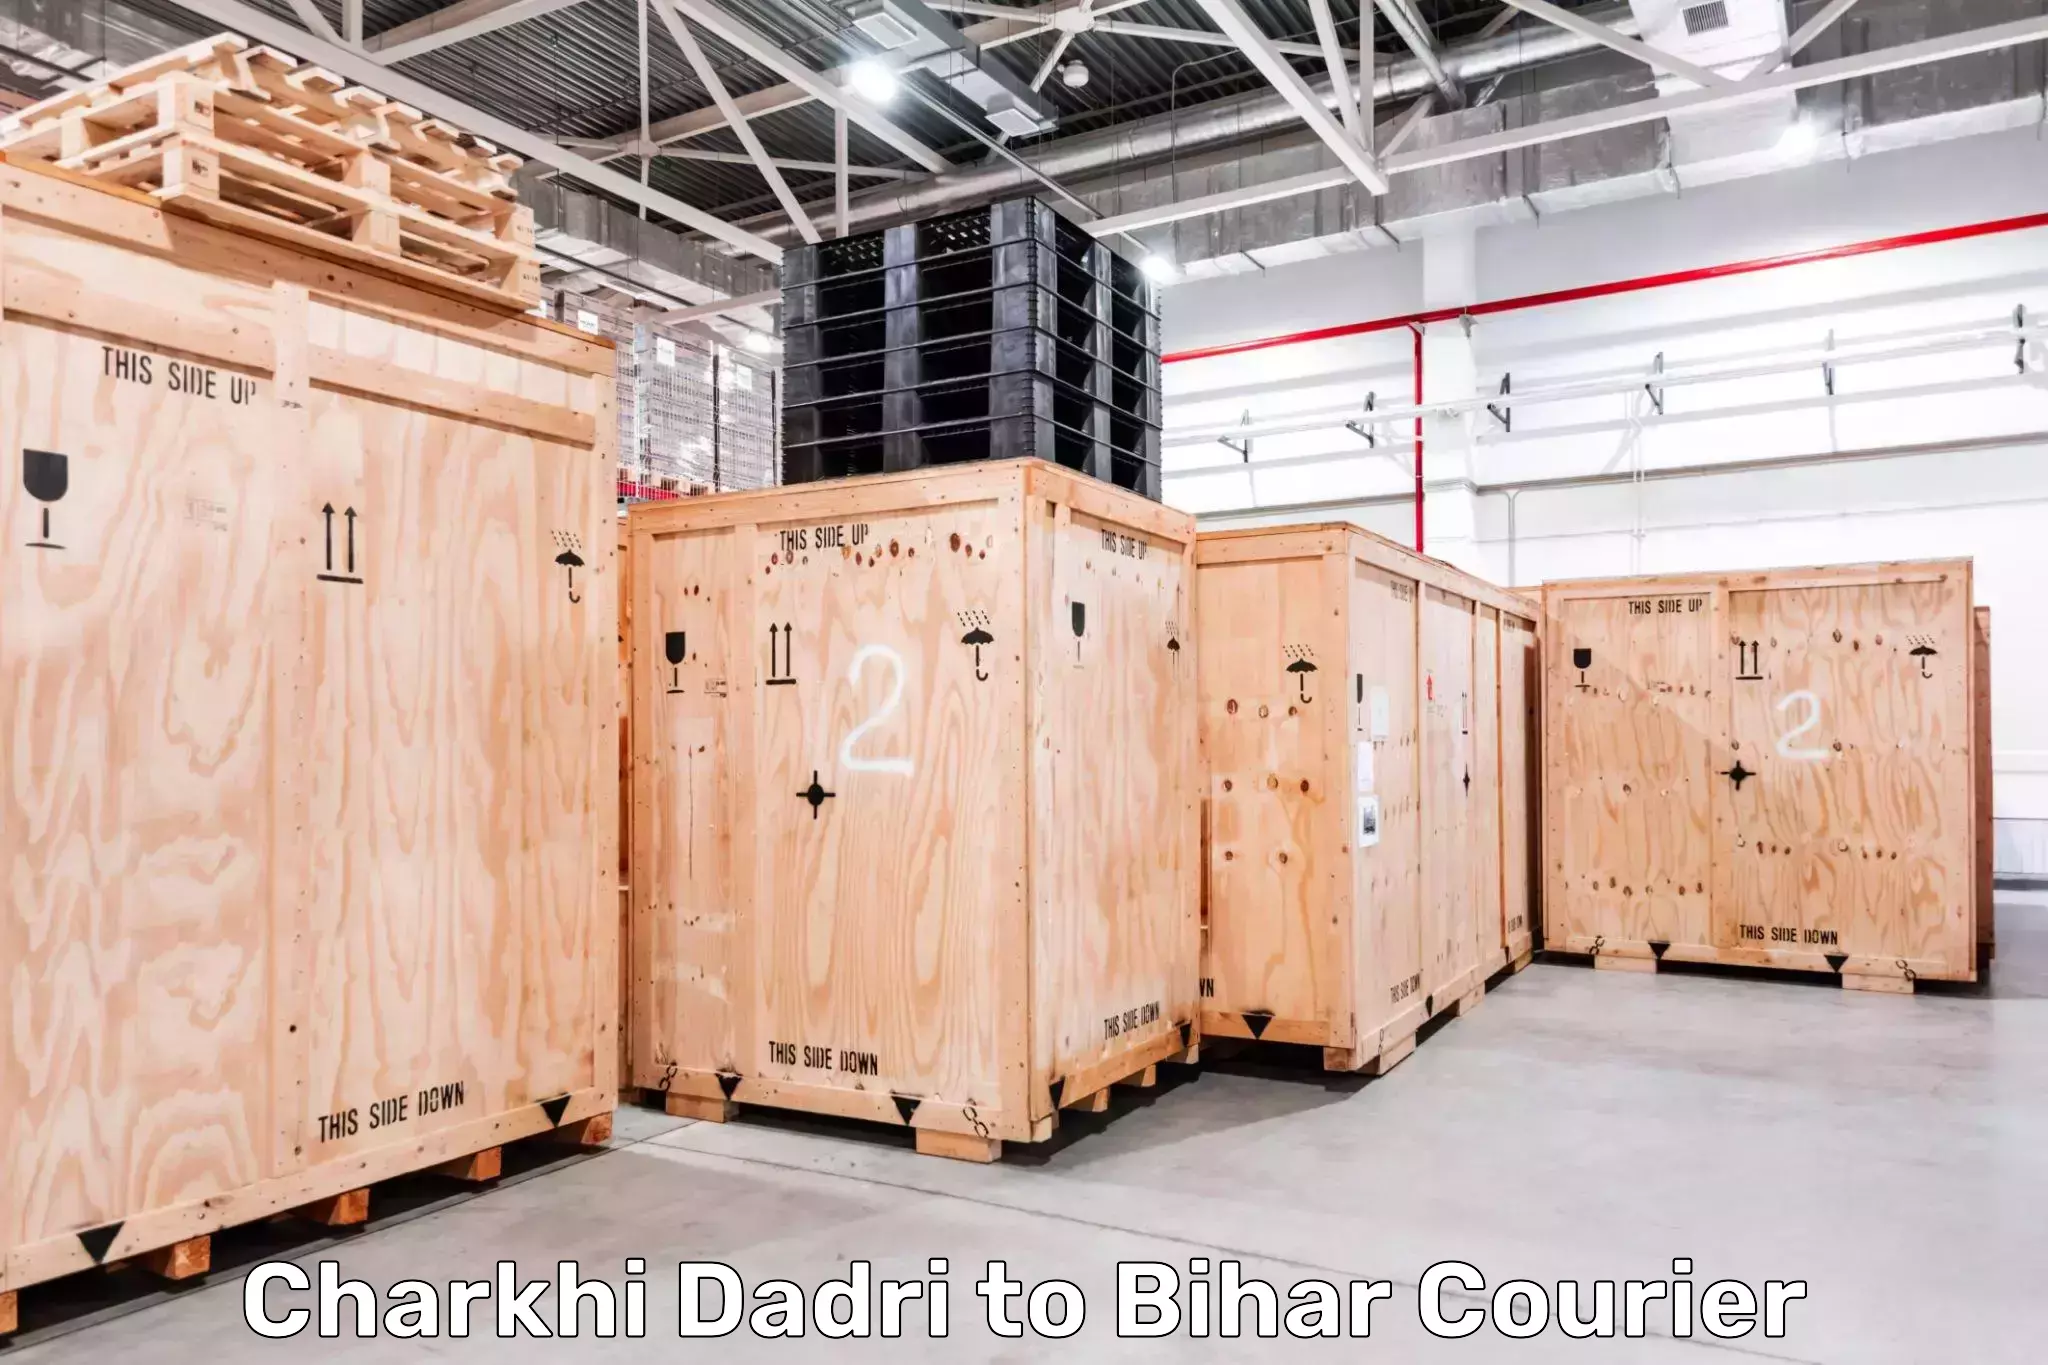 Package delivery network Charkhi Dadri to Masaurhi